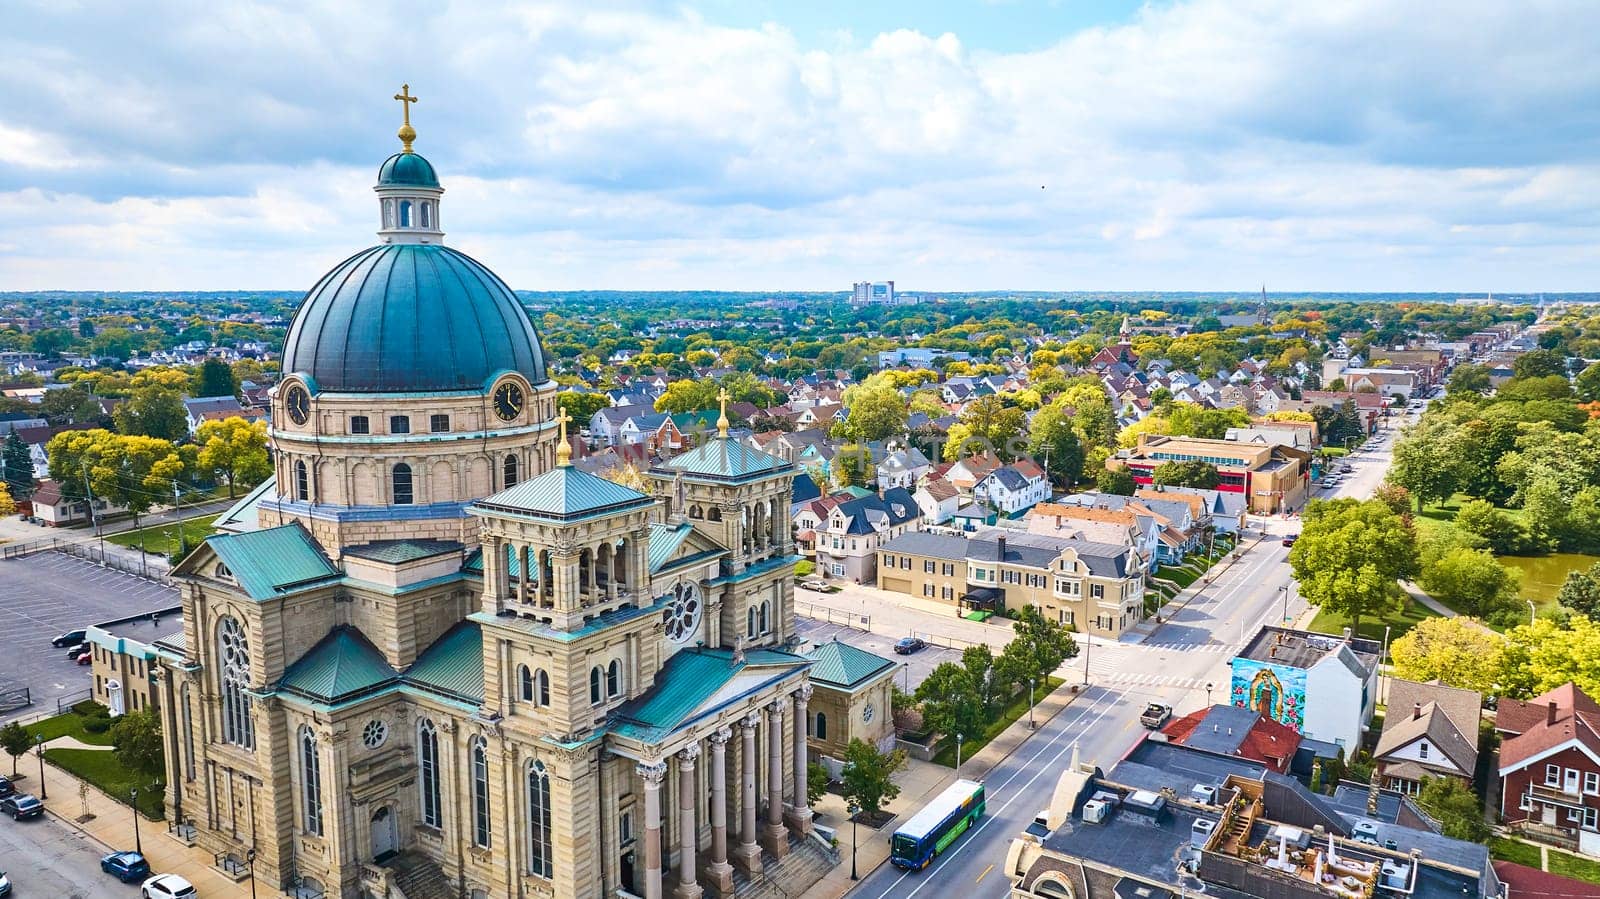 Aerial view of historical Basilica of St Josaphat in Milwaukee, Wisconsin, showcasing its grand architecture amidst suburban landscape, shot with DJI Mavic 3 drone.